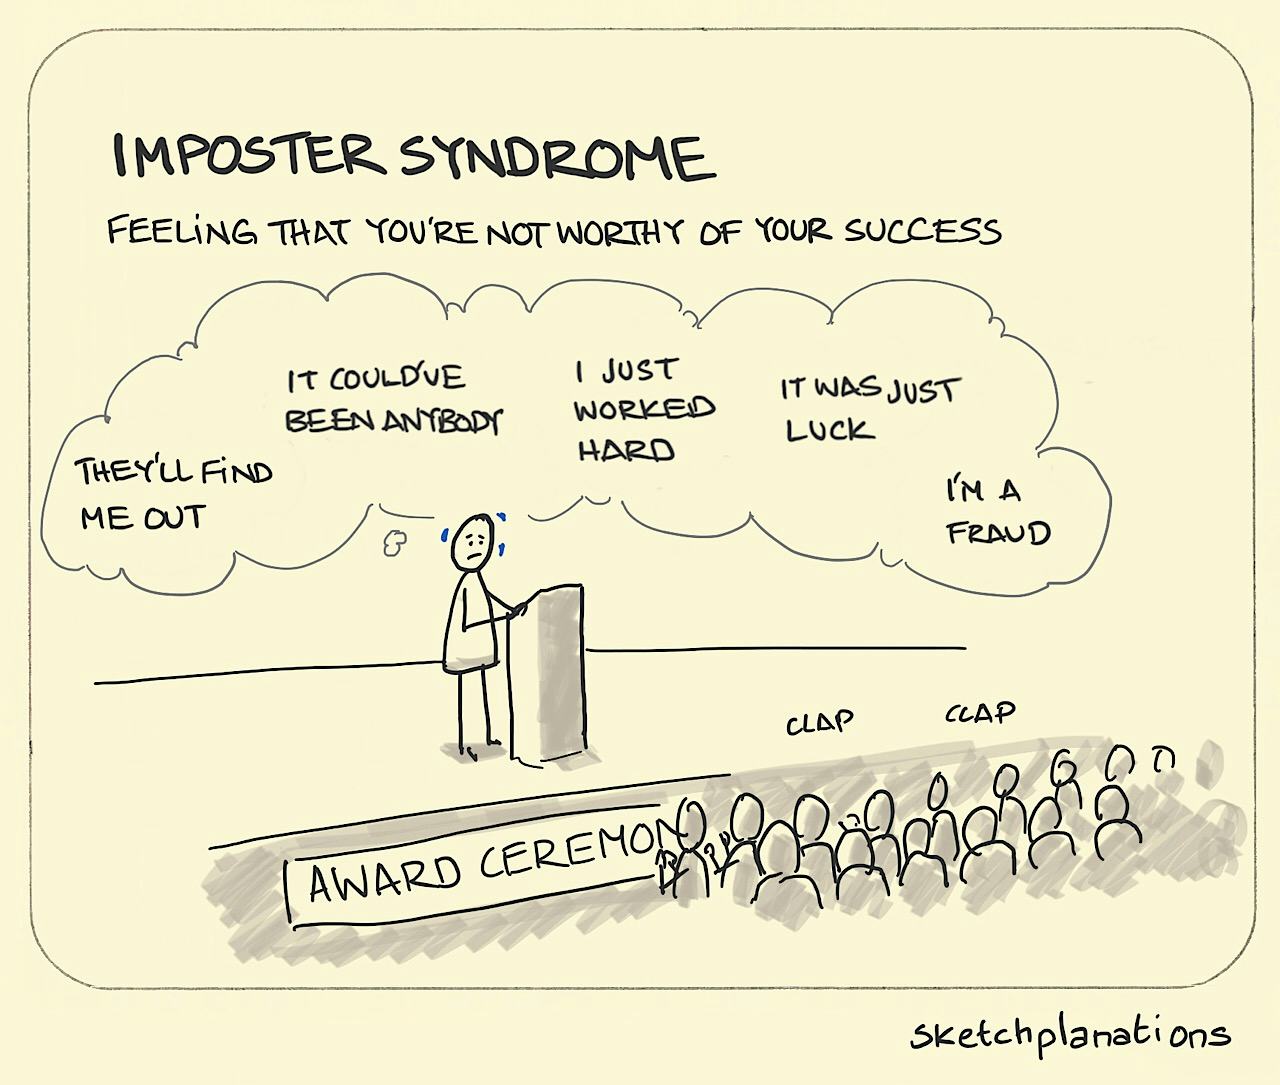 Imposter syndrome - Sketchplanations